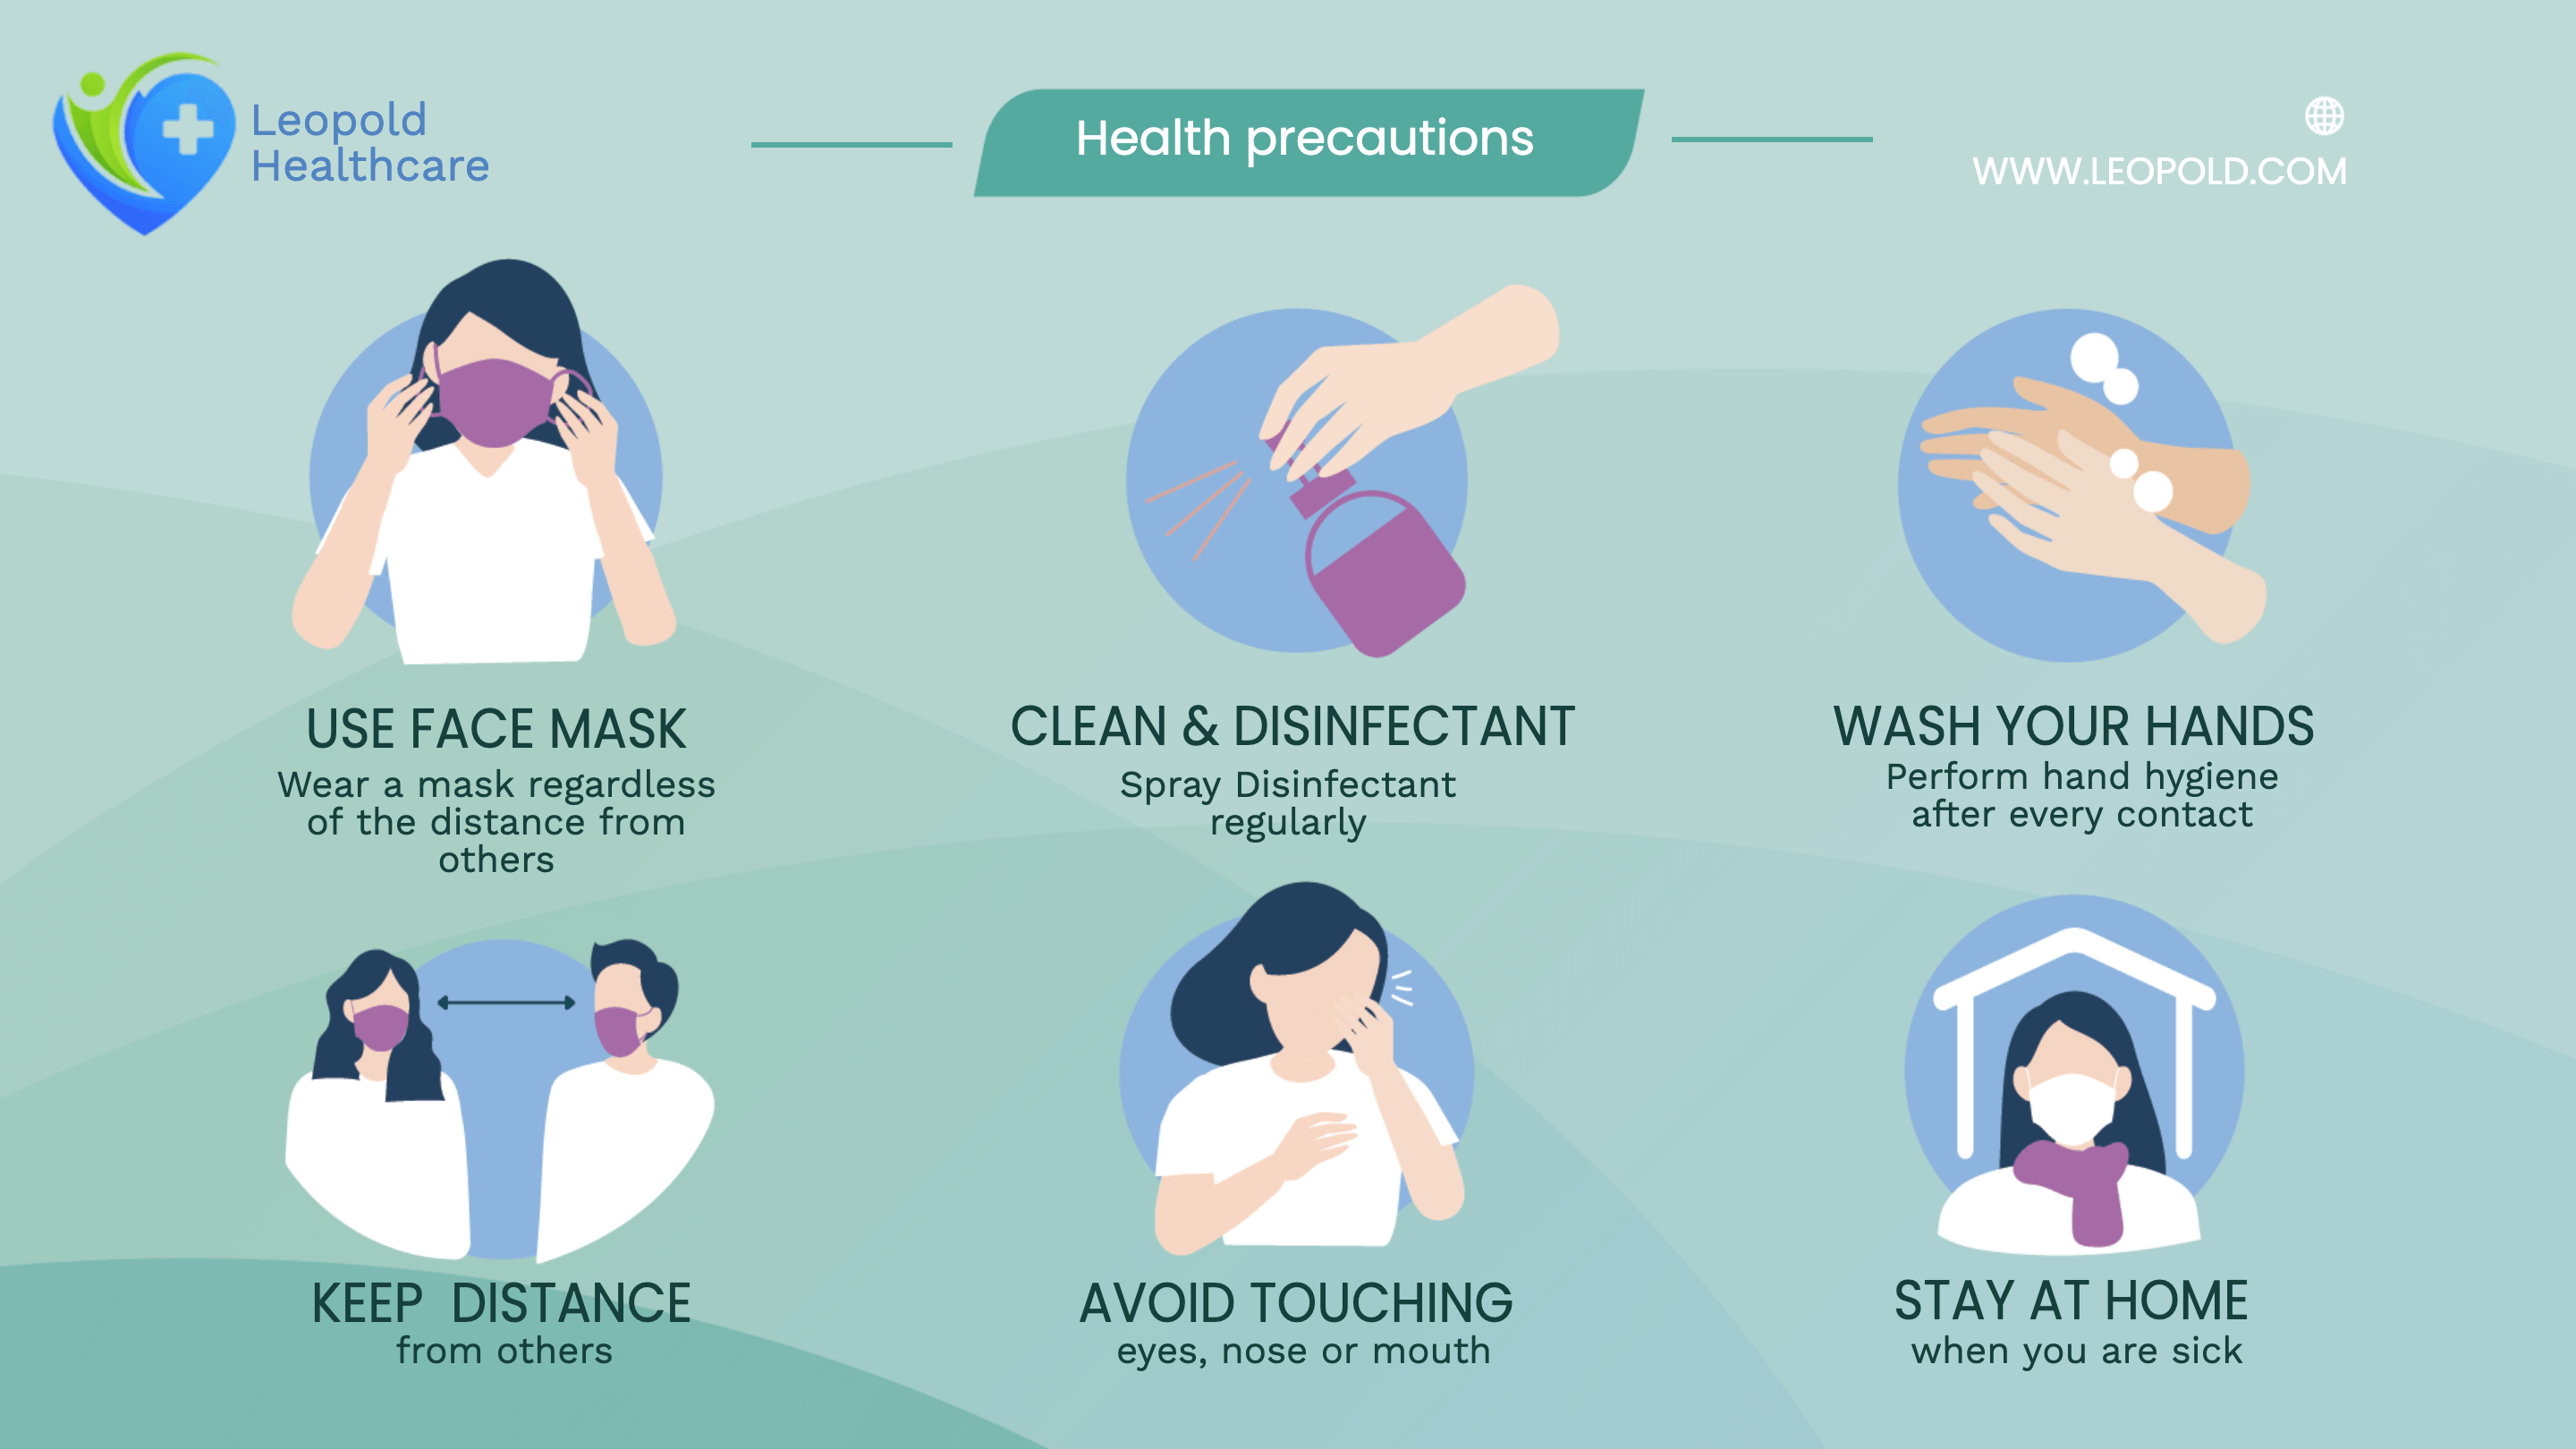 Informative Health & Hygiene Precautions Template for Hospital Visitor Lounge